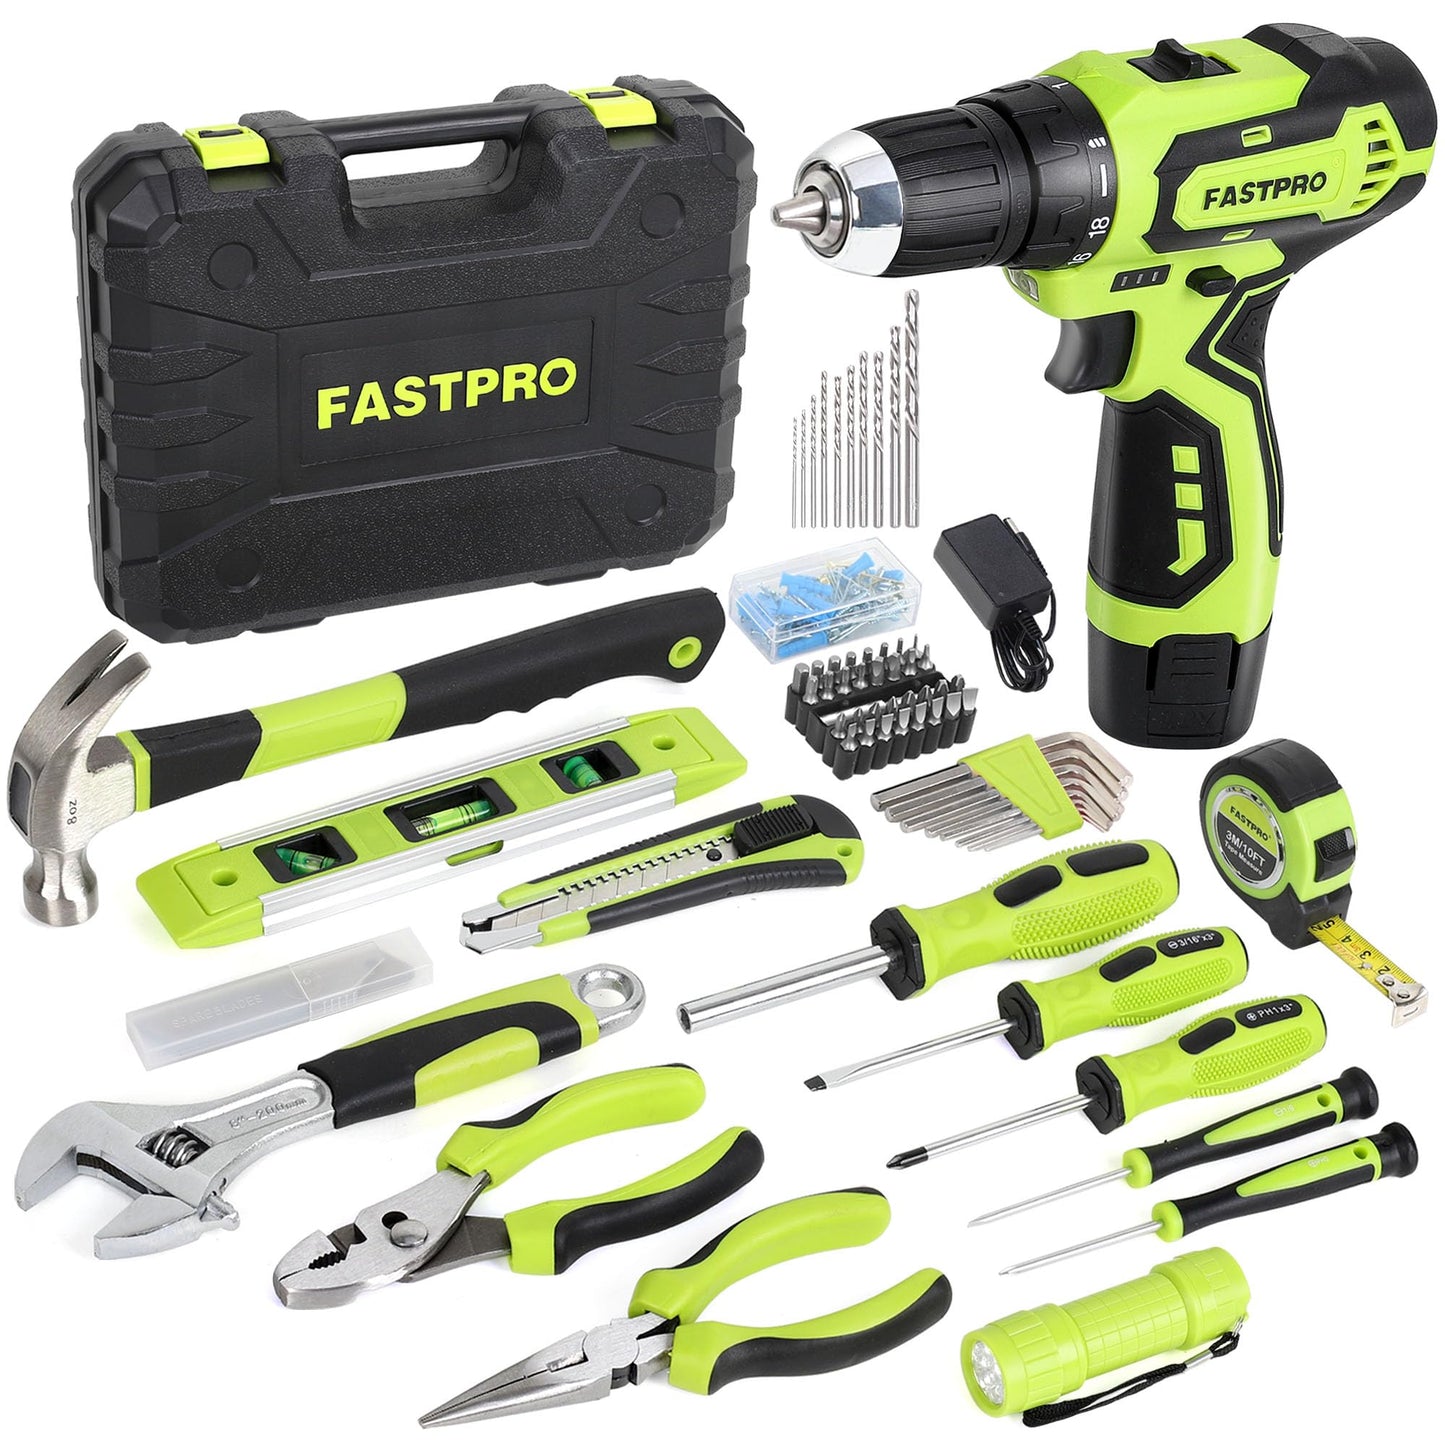 FASTPRO 160-Piece Home Tool kit with Drill, 12V Cordless Lithium-ion Drill Driver and Household Repairing Tool Set with Storage Case, For DIY, Home